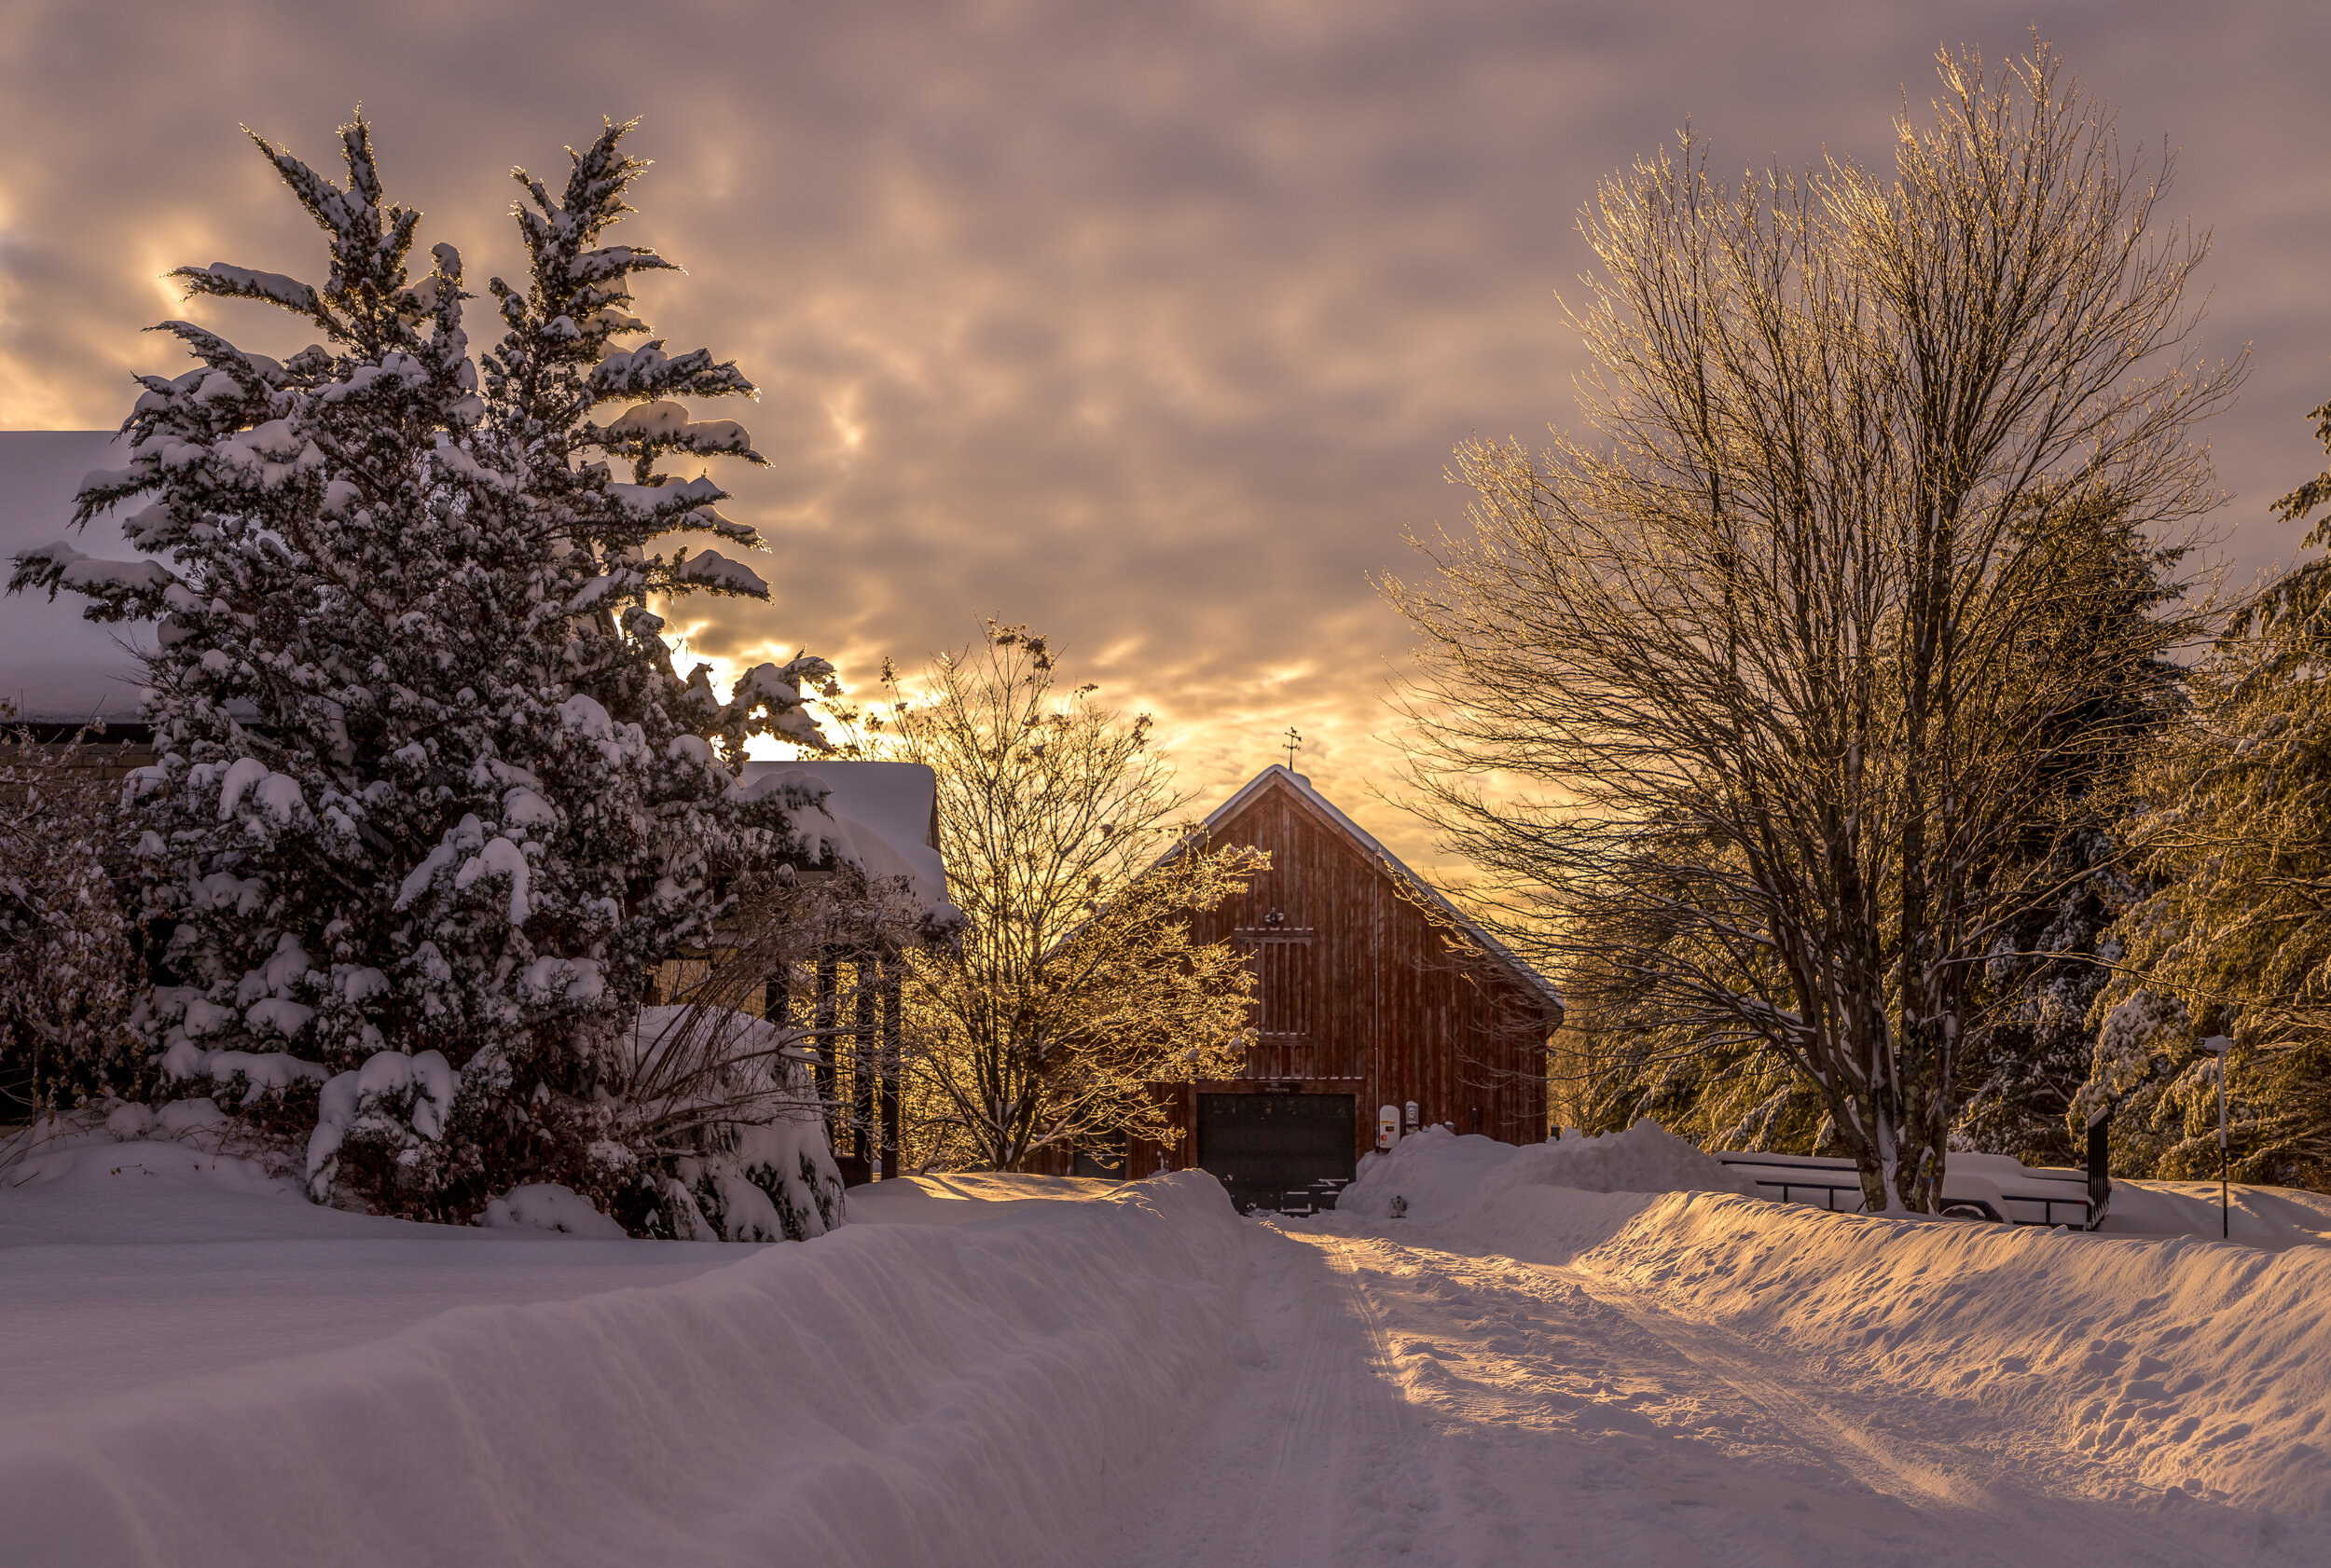 Sunrise after a snowstorm in Jericho, VT